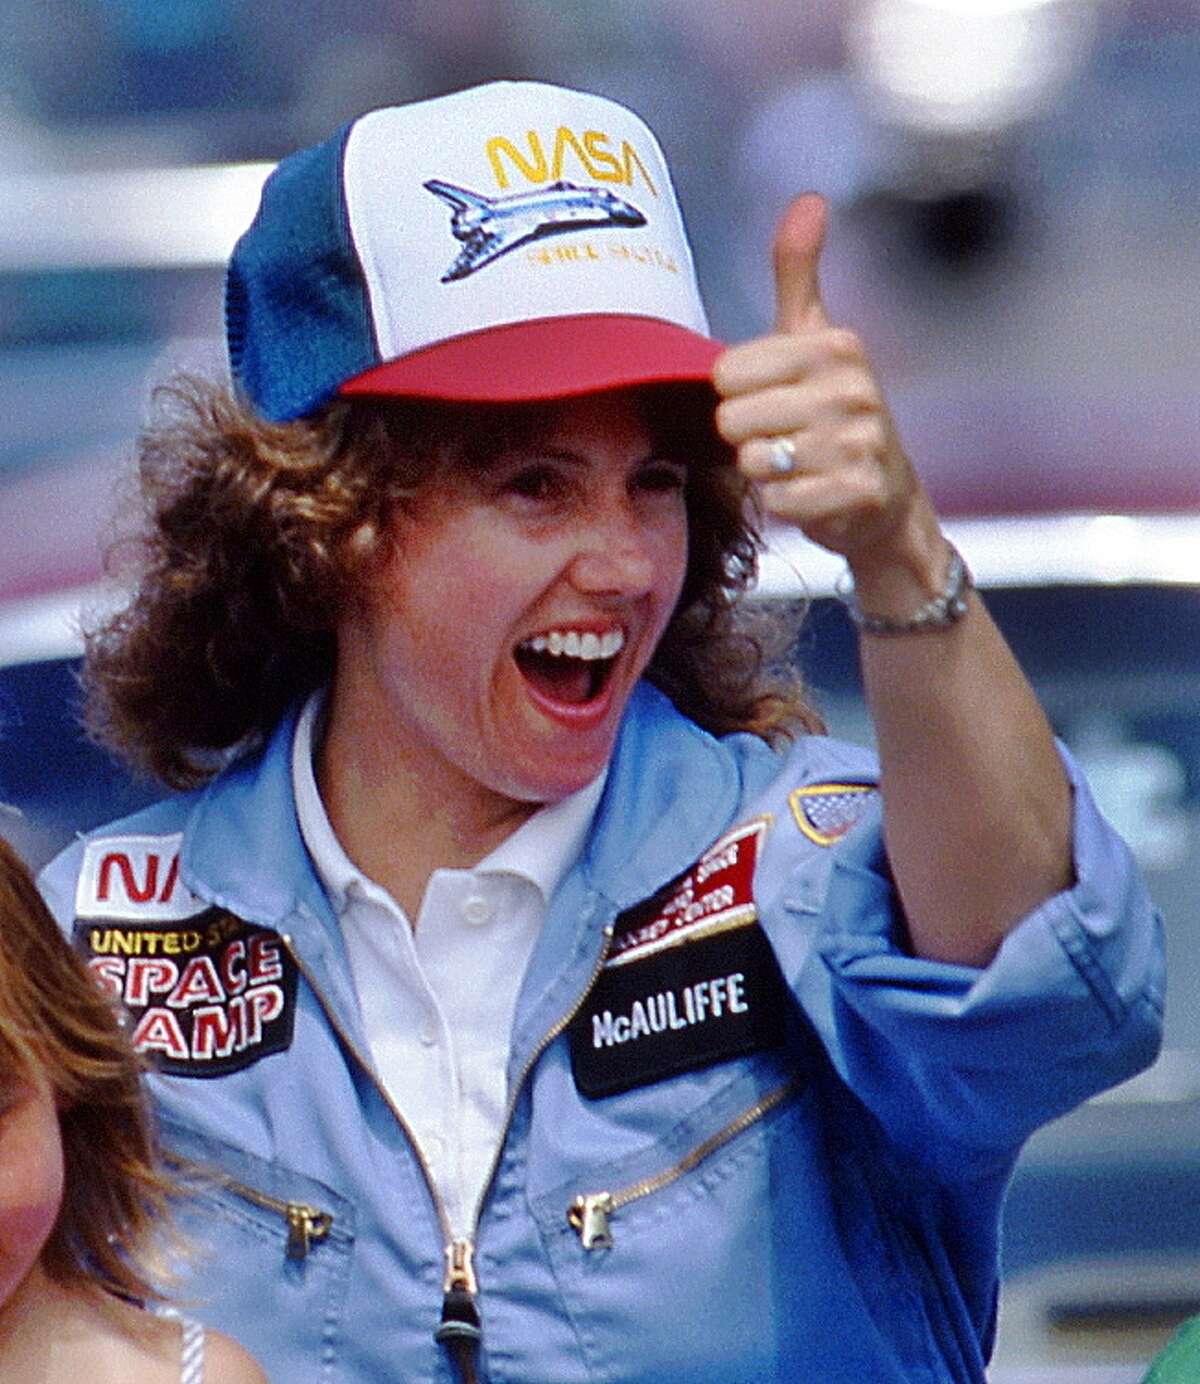 In this 1985 photo, high school teacher Christa McAuliffe gives a thumbs-up during a parade down Main Street in Concord, N.H. McAuliffe was one of seven crew members killed in the Space Shuttle Challenger explosion on Jan. 28, 1986. (AP Photo/Jim Cole)